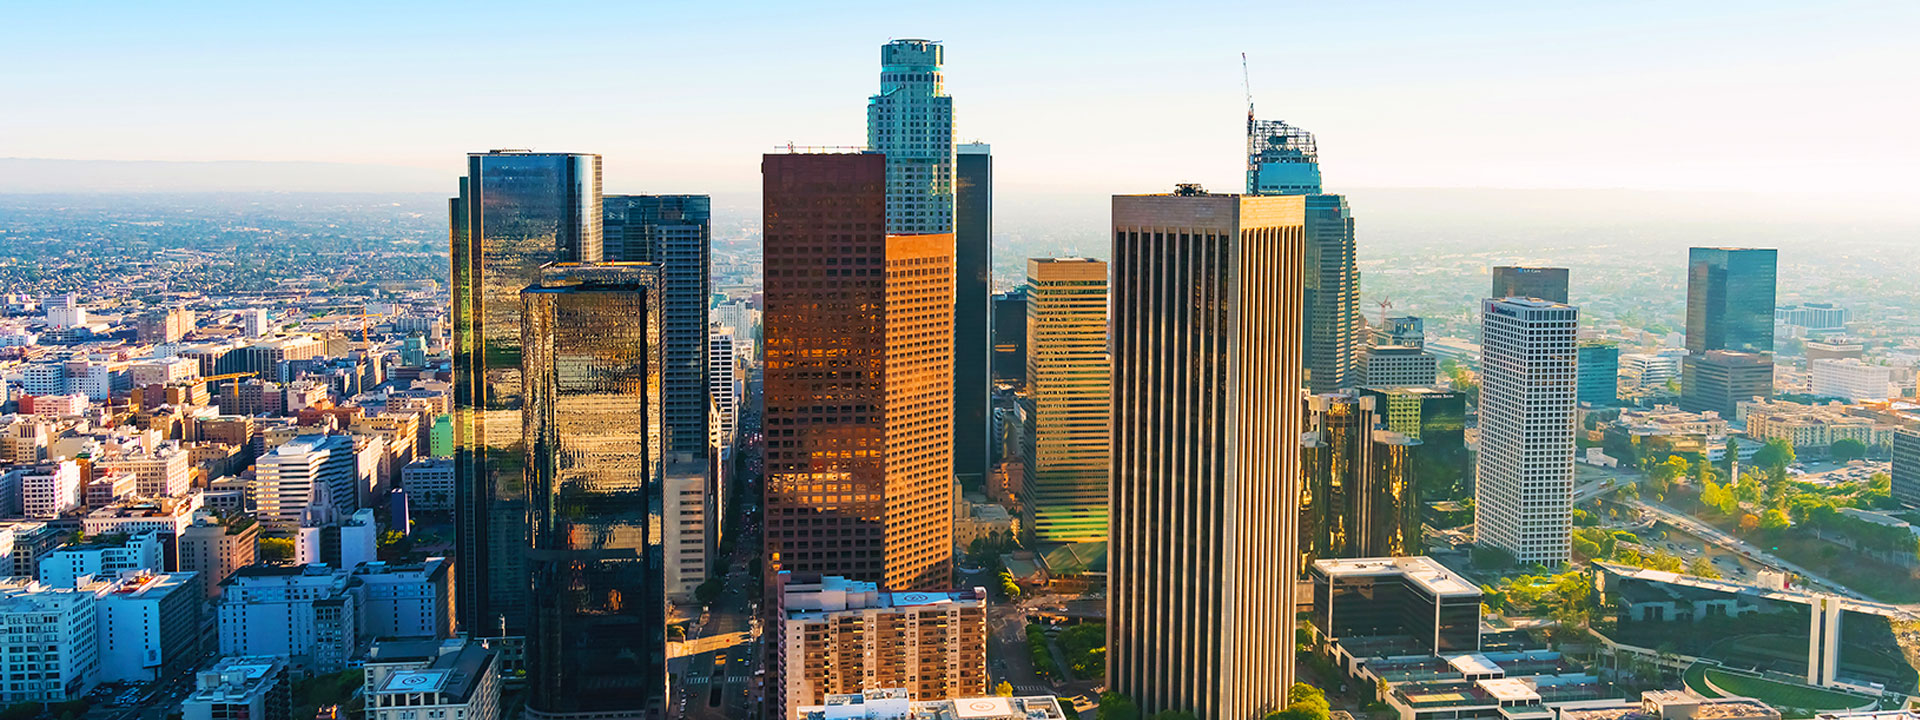 Downtown LA with skyscrapers